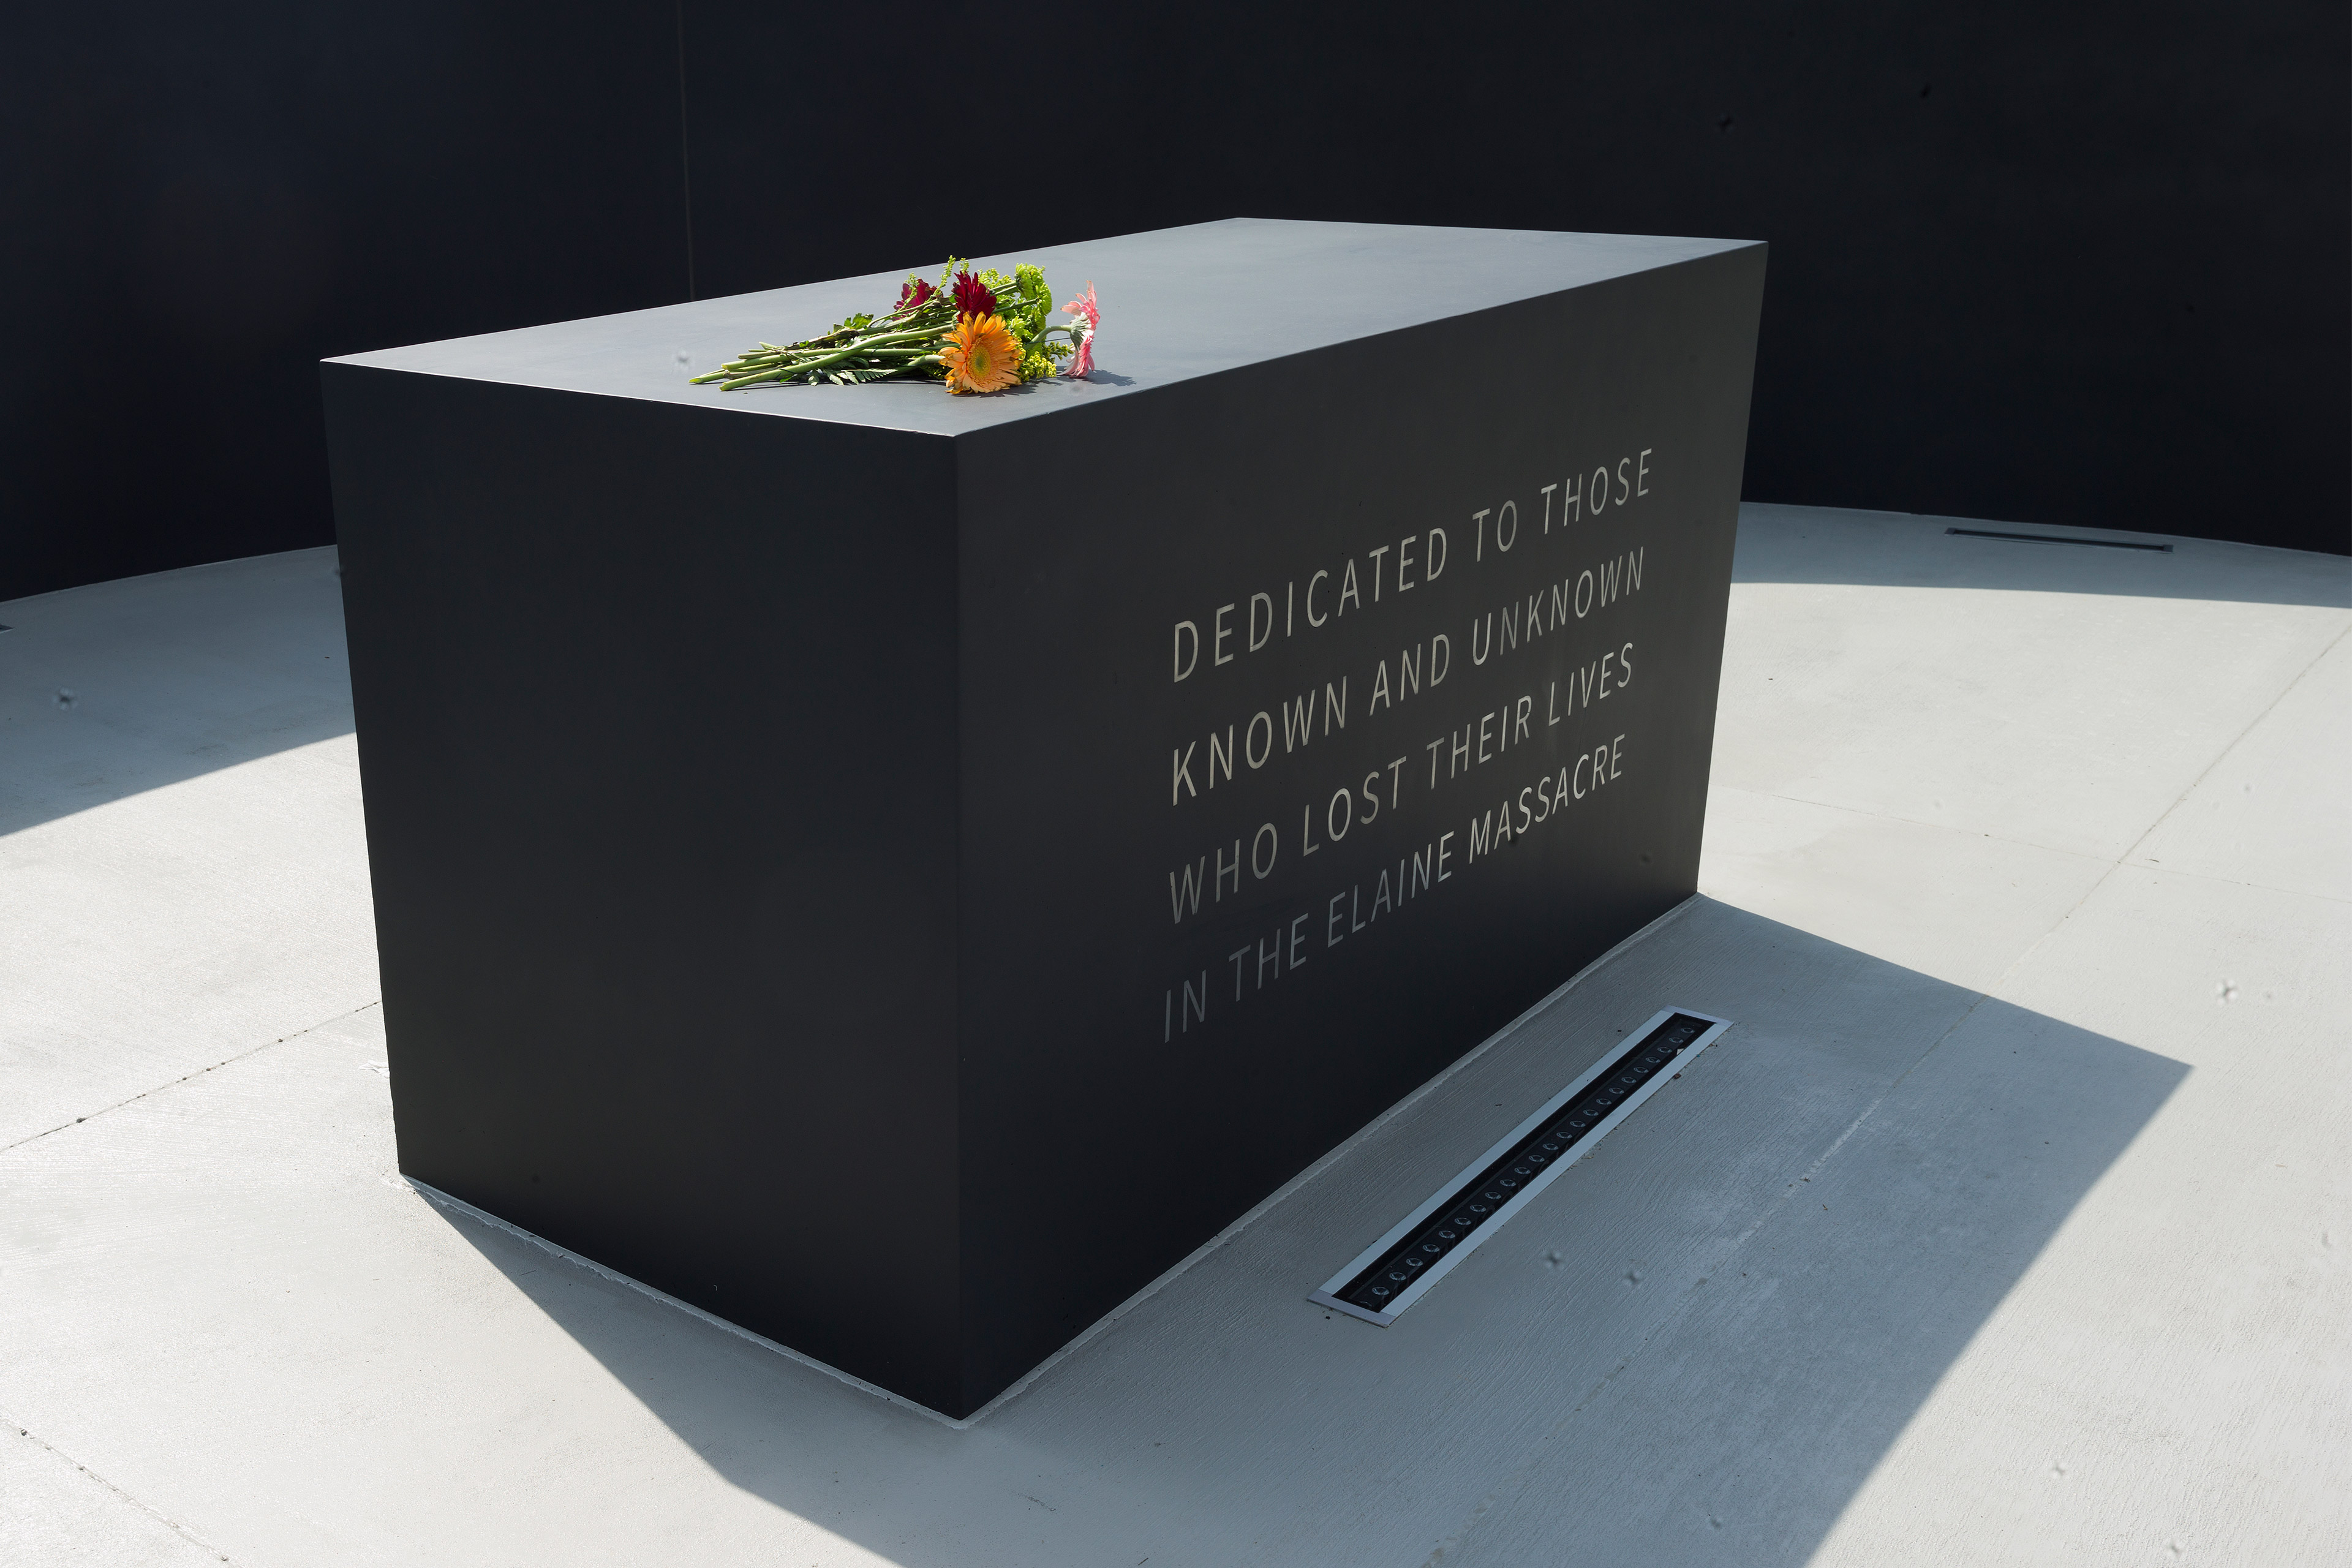 A photo of a memorial with flowers resting on top of it. An inscription on it reads, "Dedicated to those known and unknown who lost their lives in the Elaine massacre."